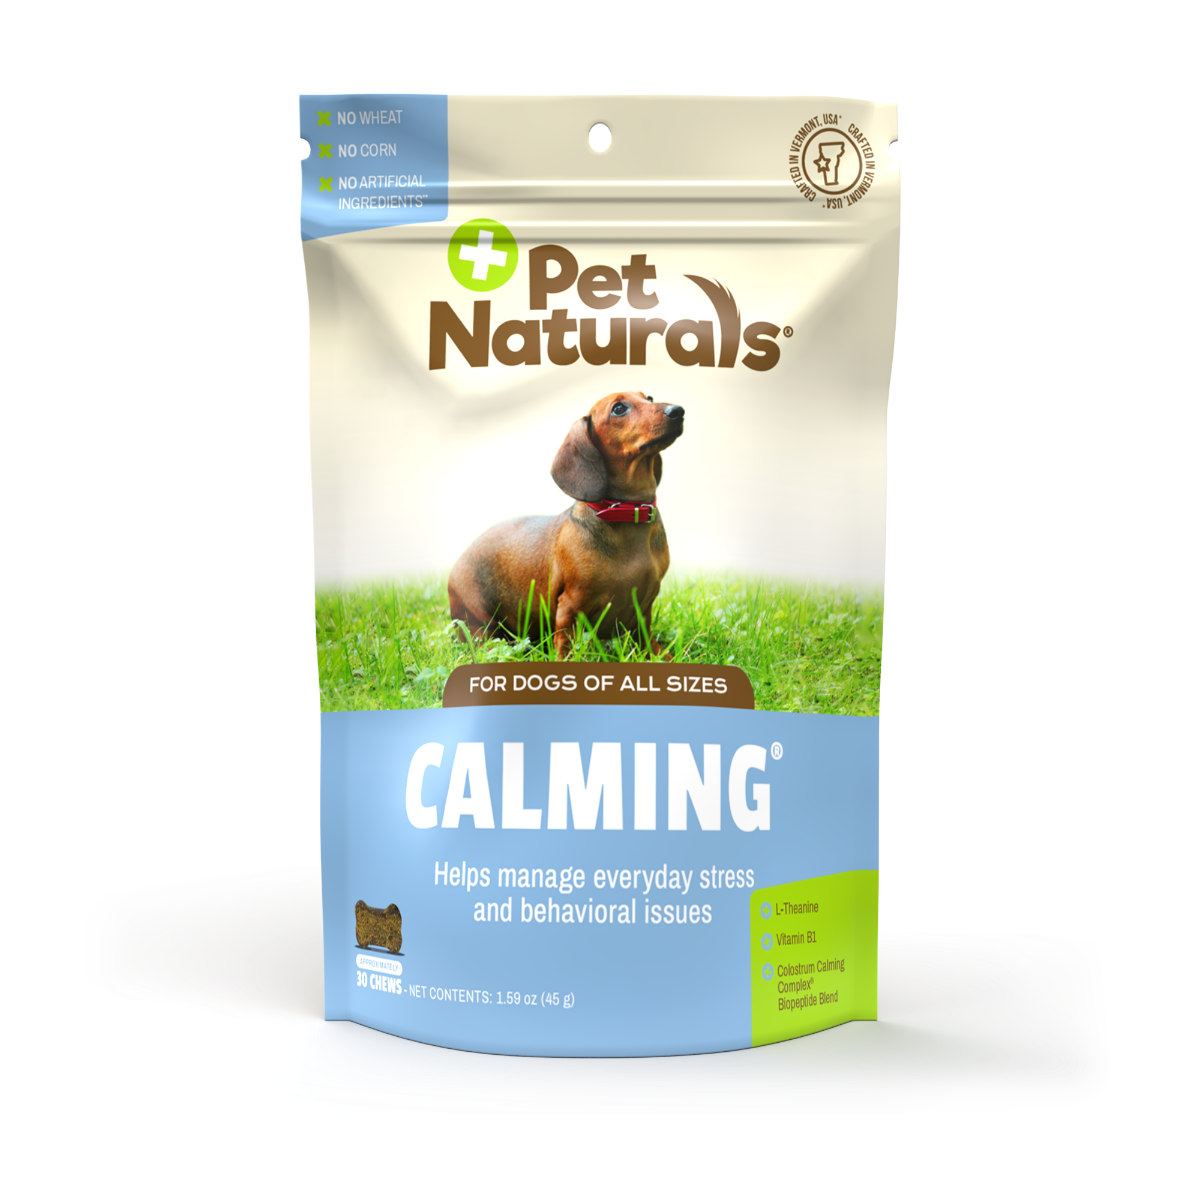 How Often Can You Give a Dog Calming Treats?